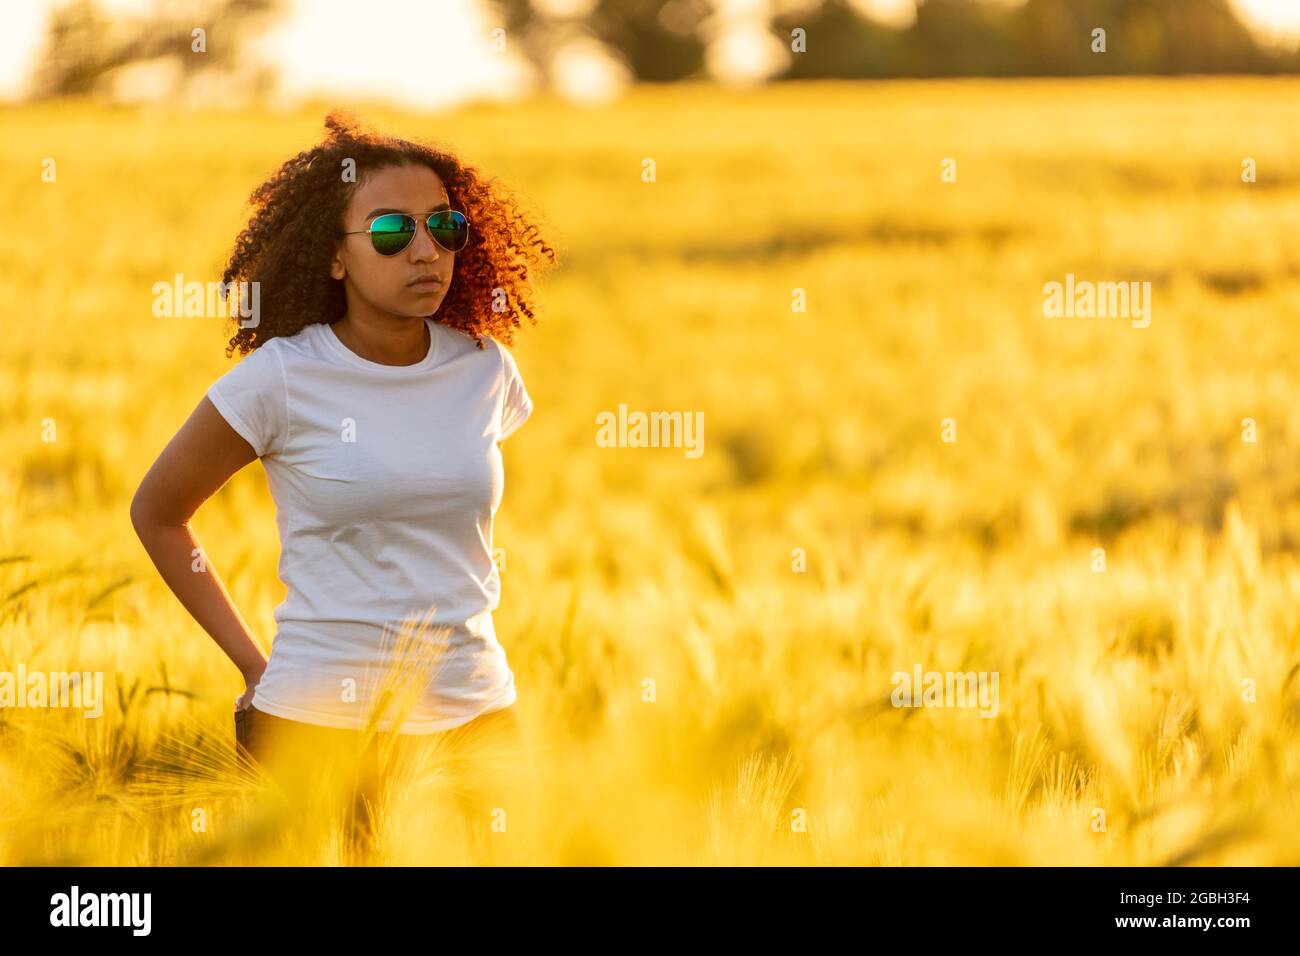 Beautiful mixed race African American female teenager young woman in a field of wheat wearing white t-shirt, sunglasses at sunset Stock Photo